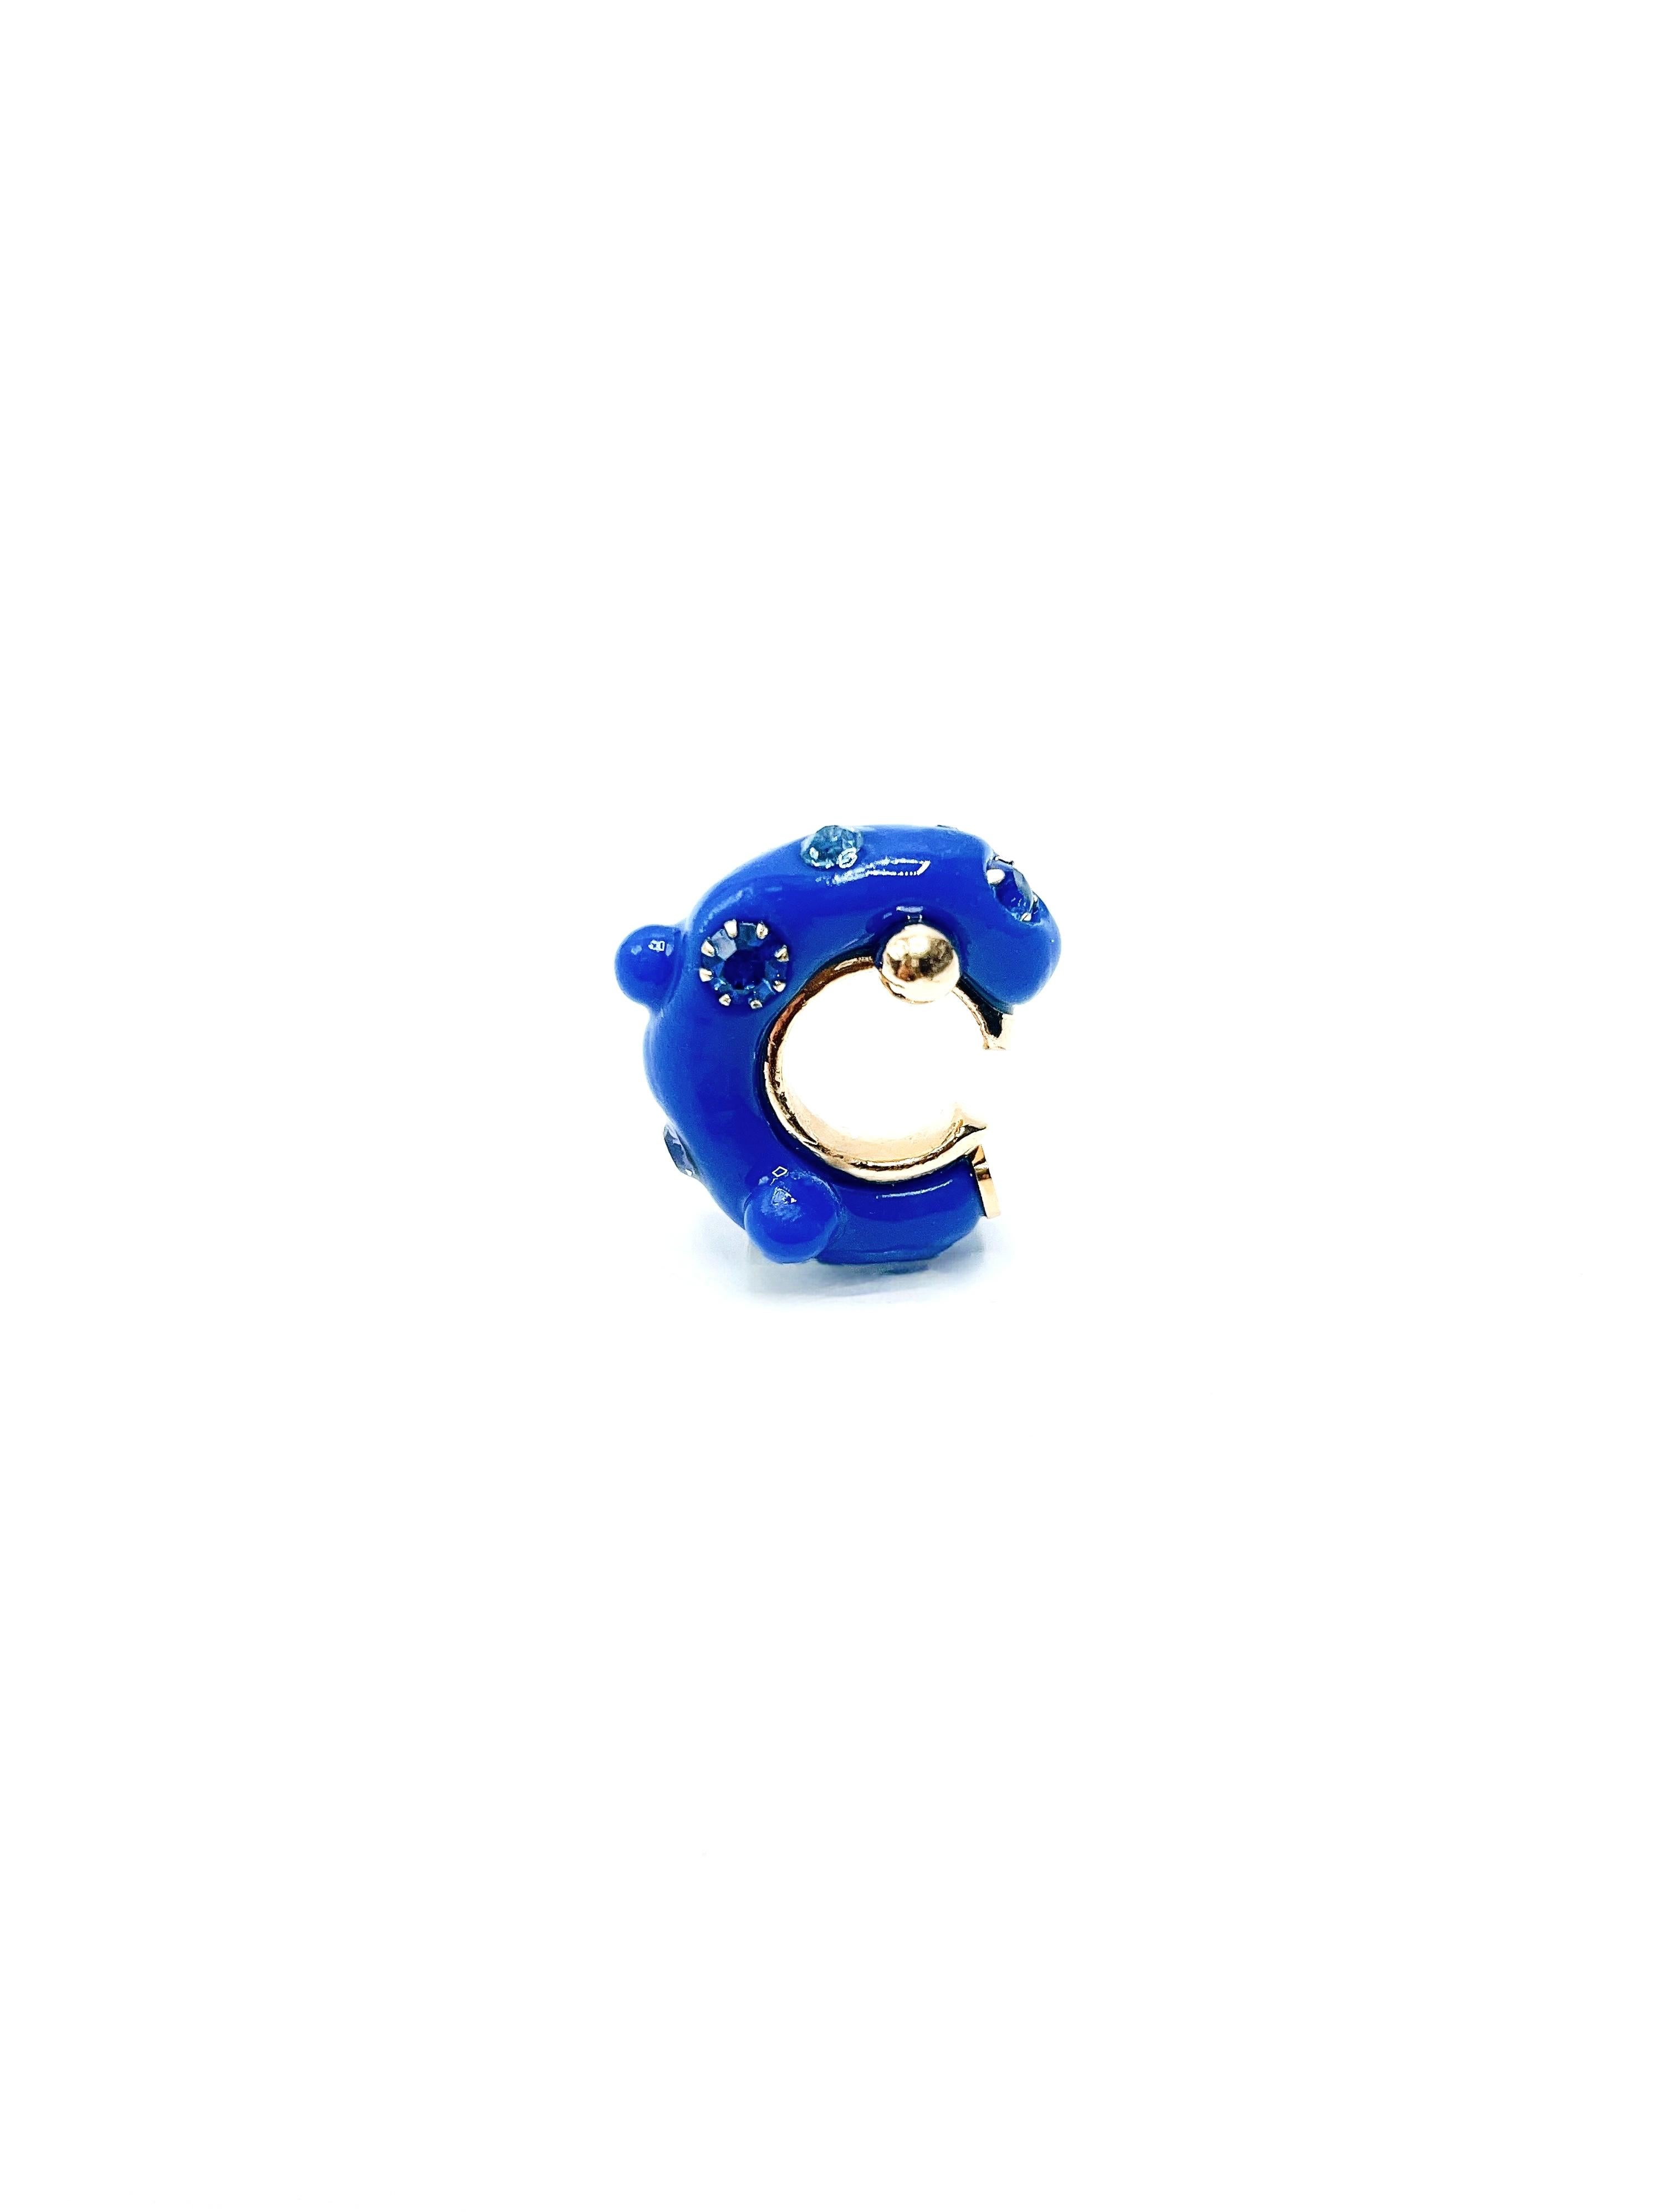 TEARDROPS in a Diary, No. 5_So Blue_Hand crafted ear cuff In New Condition For Sale In Brooklyn, NY